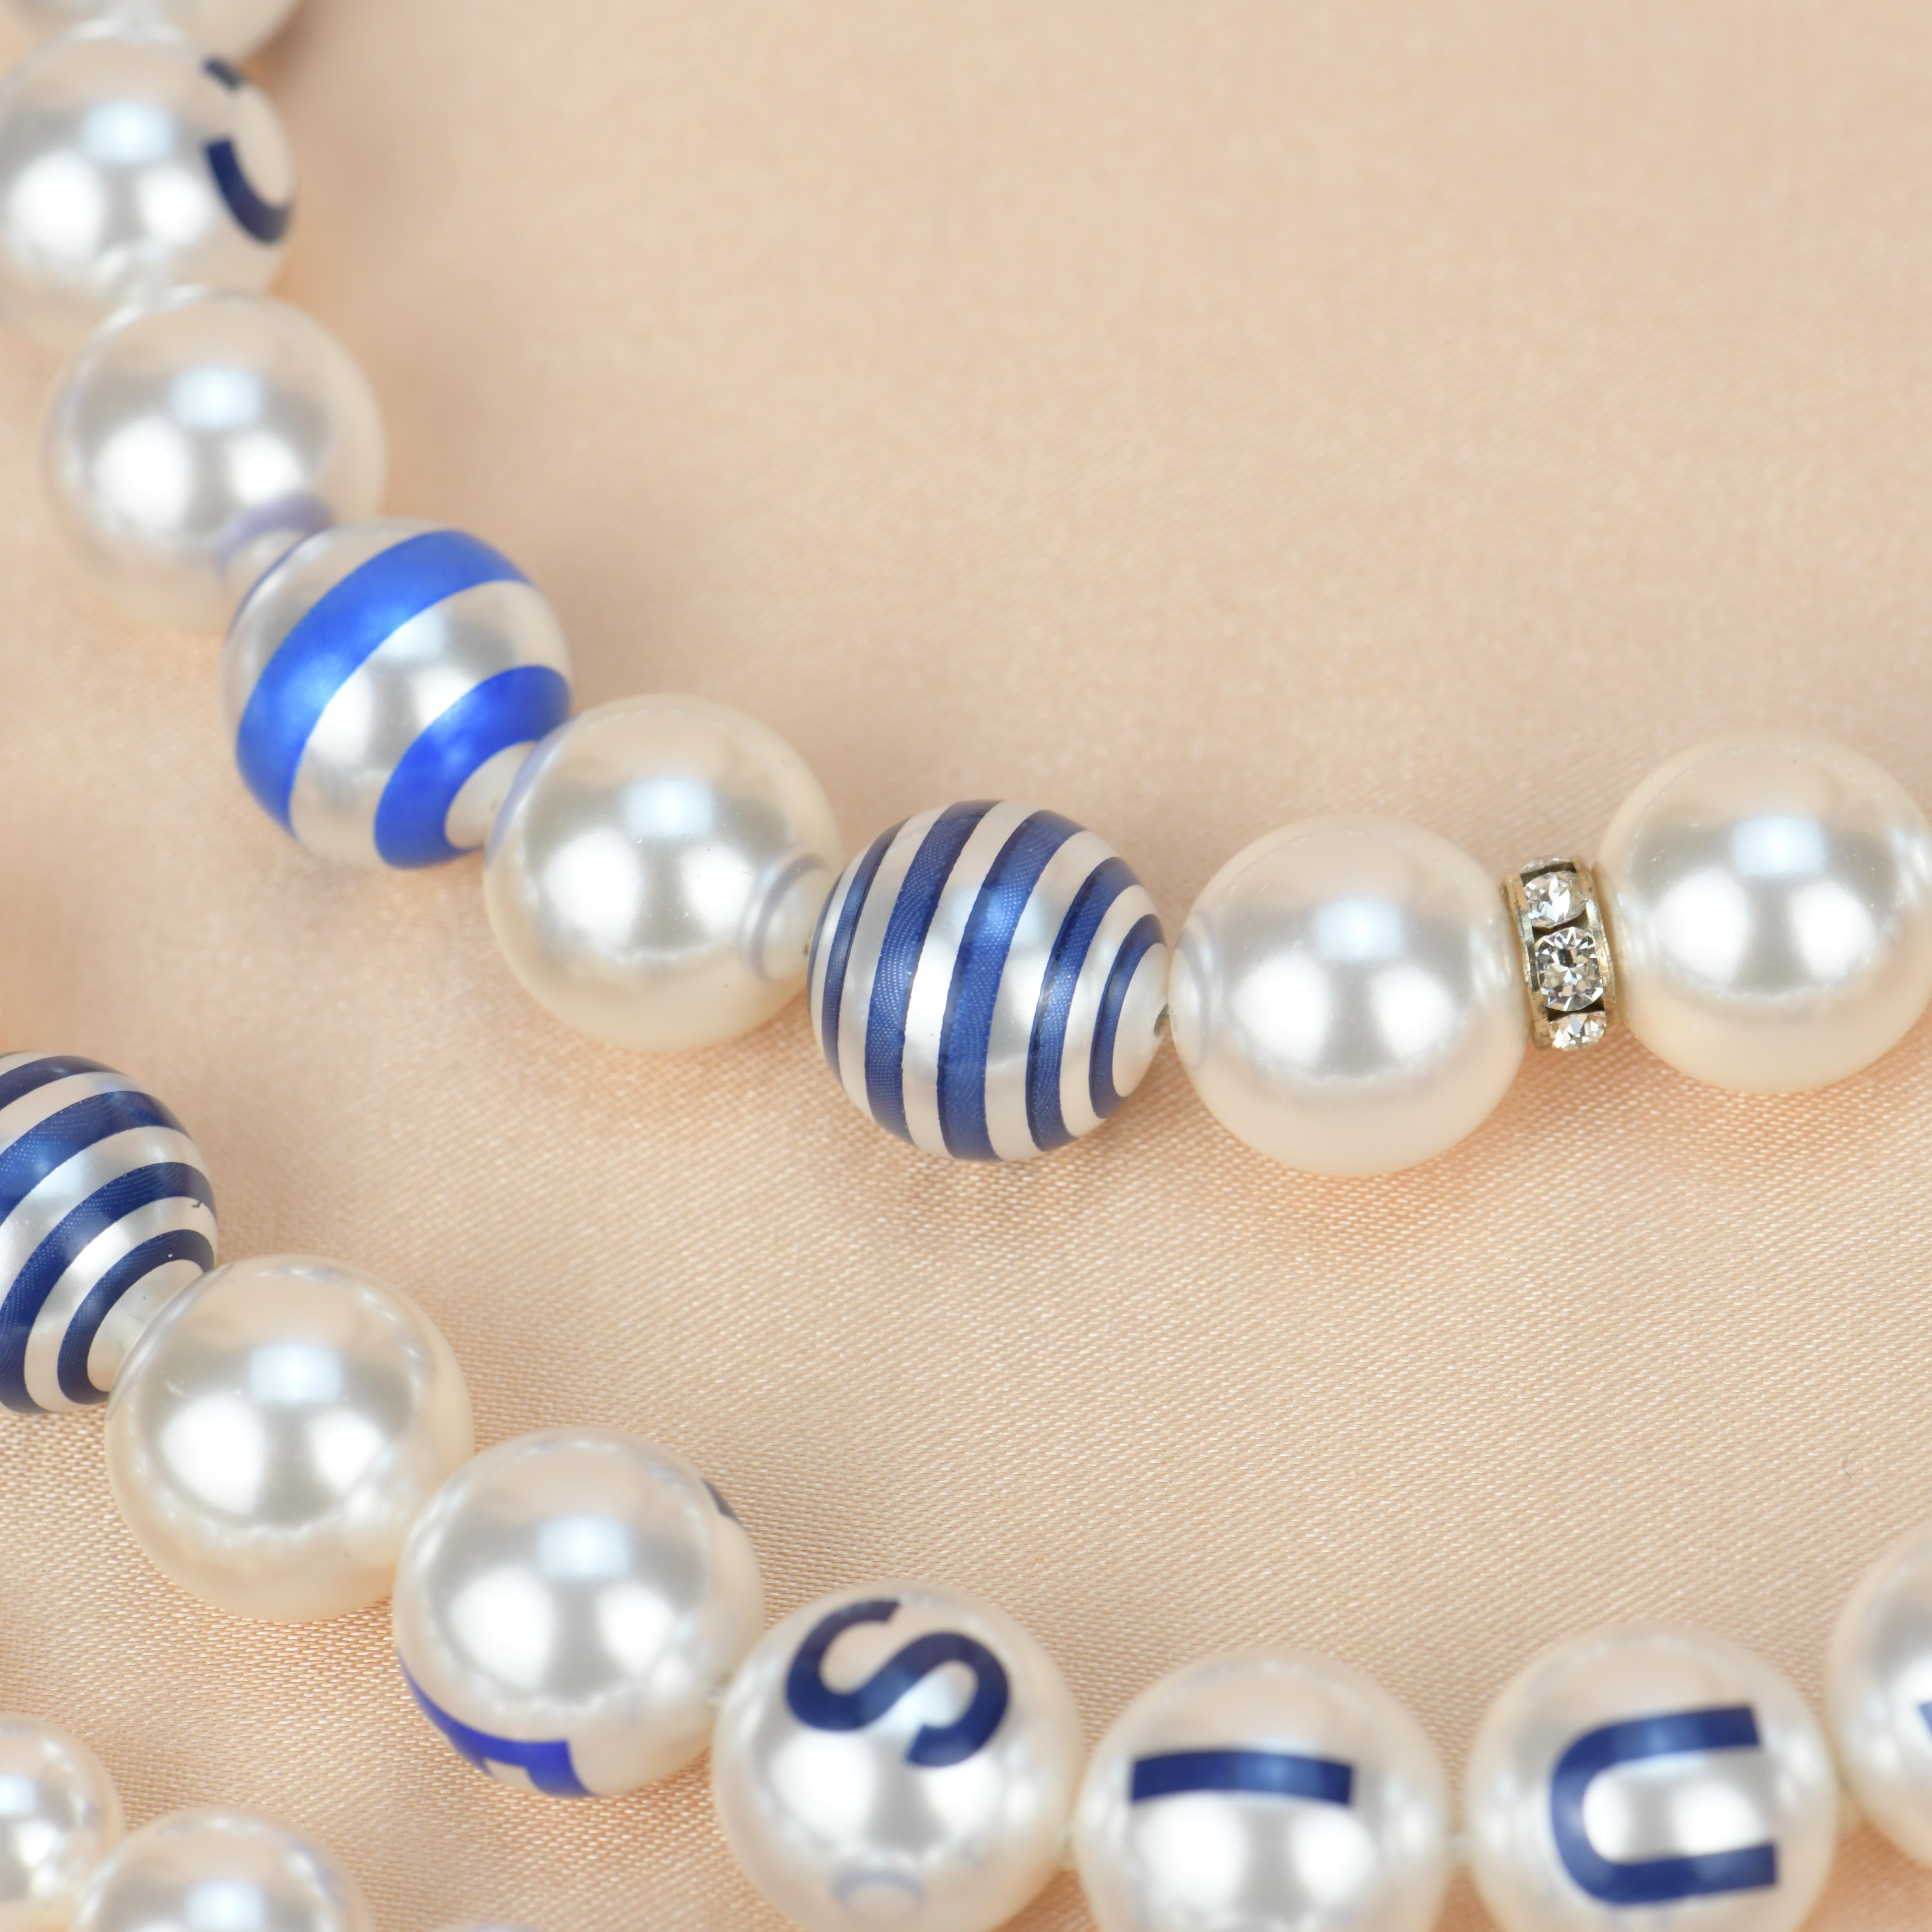 Chanel Cruise 2019 Painted Pearl Coco Logo Necklace 3